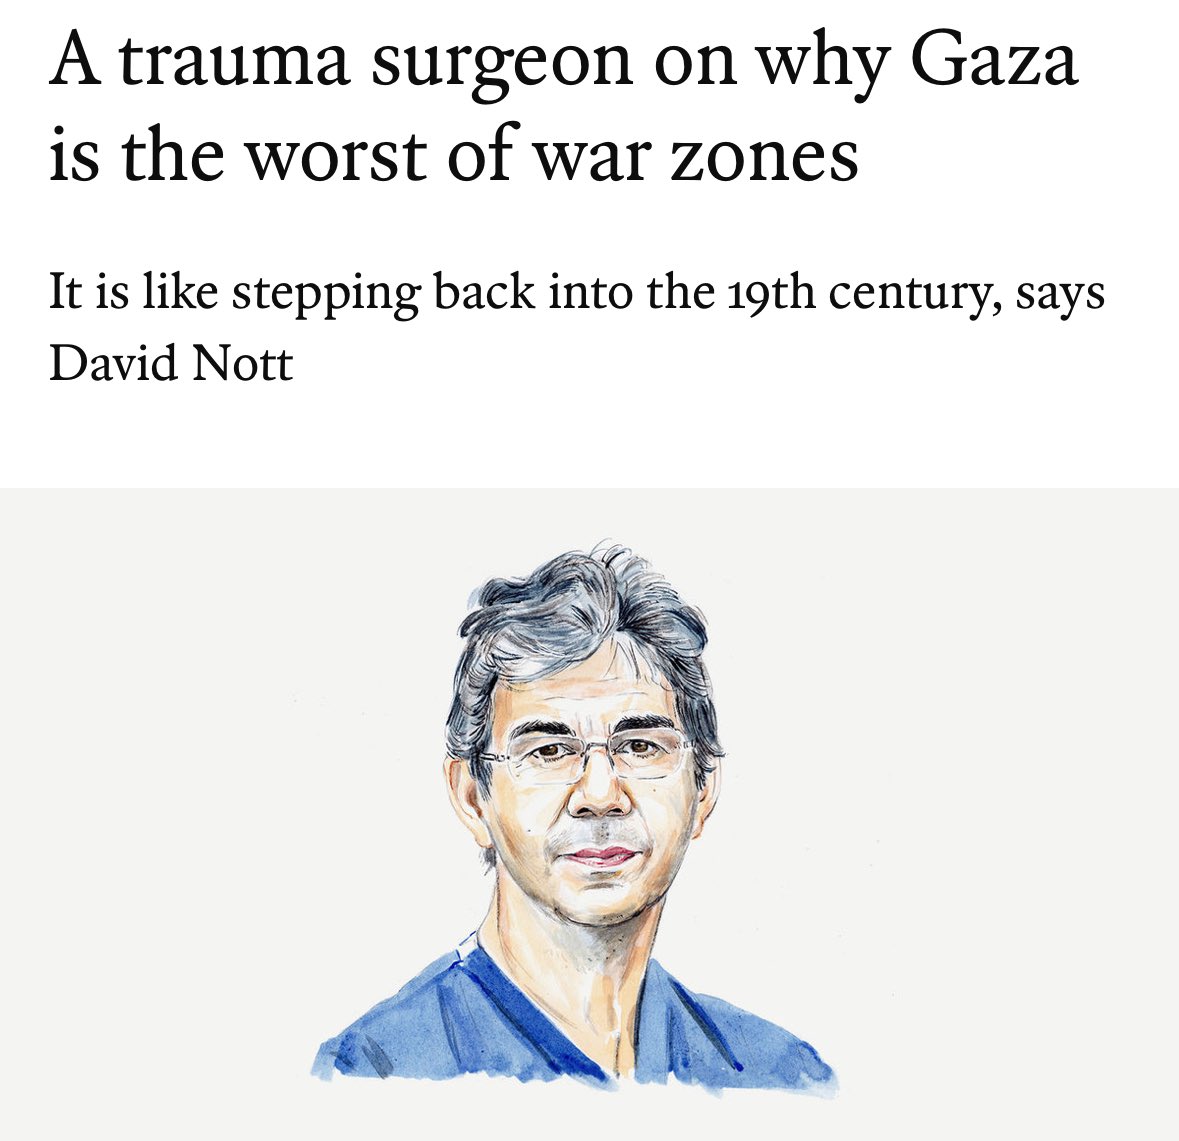 Truly shocking article by surgeon David Nott in ⁦@TheEconomist⁩ this week regarding the conditions in Gaza.